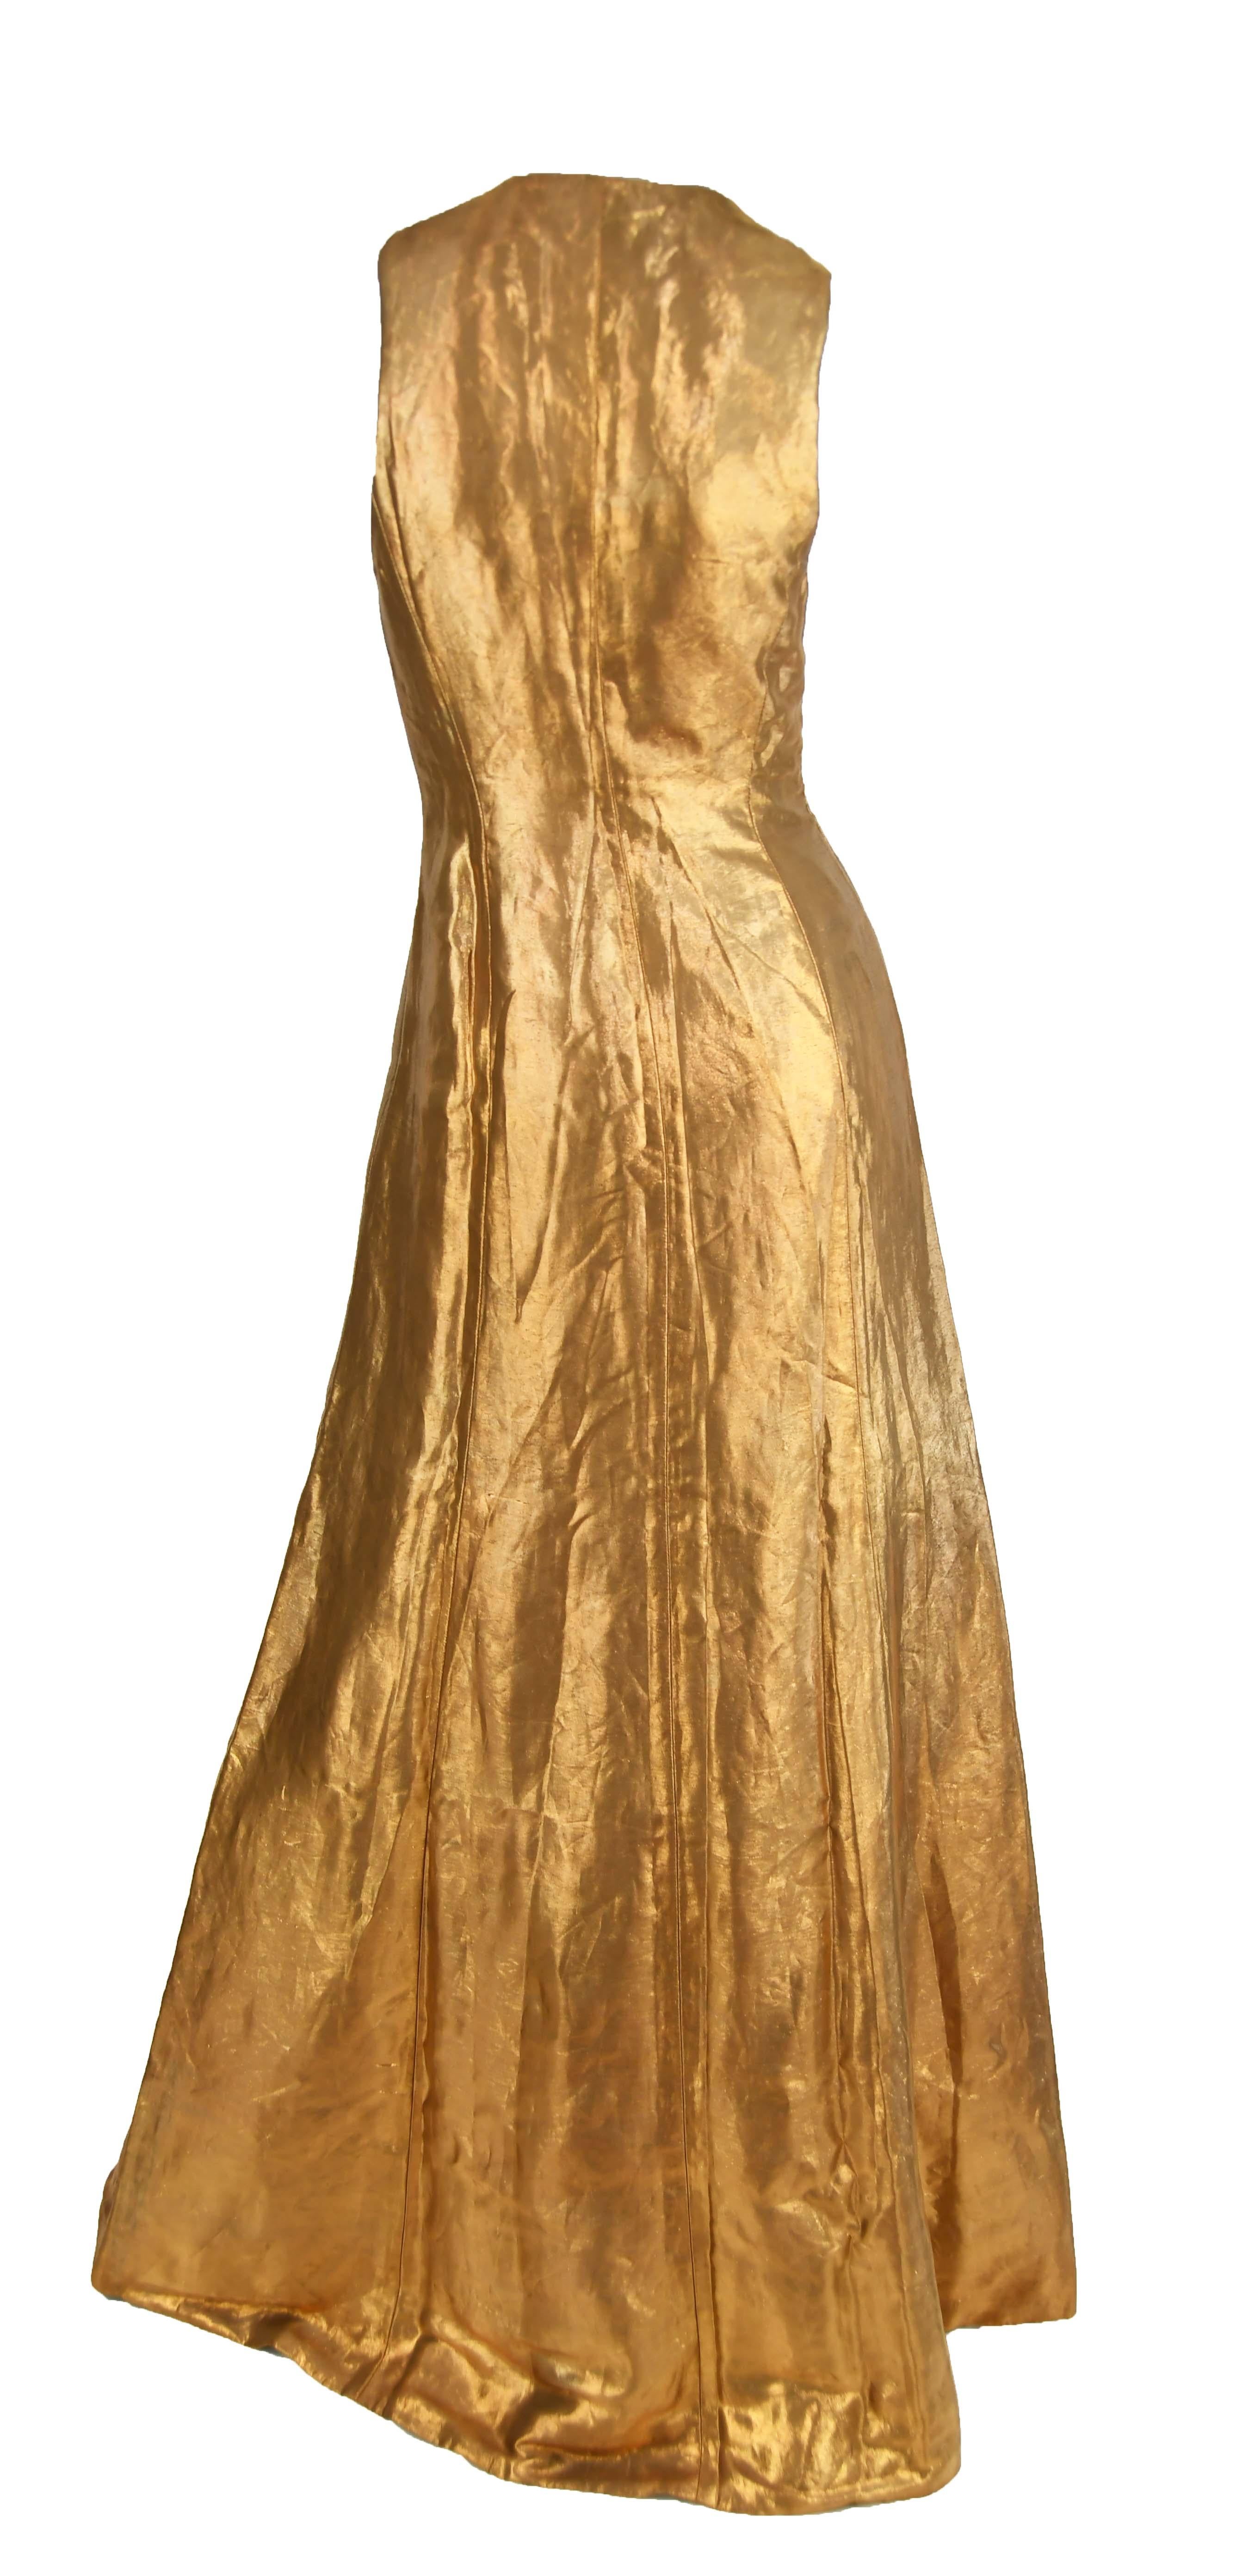 Inspired by travels to India and Africa, this stunning deep v-neck sleeveless Ralph Lauren Collection gown is one of the most memorable runway looks from the Fall/Winter 2007 Collection.

Size: 4

Condition: New with original tags

Composition: 51%